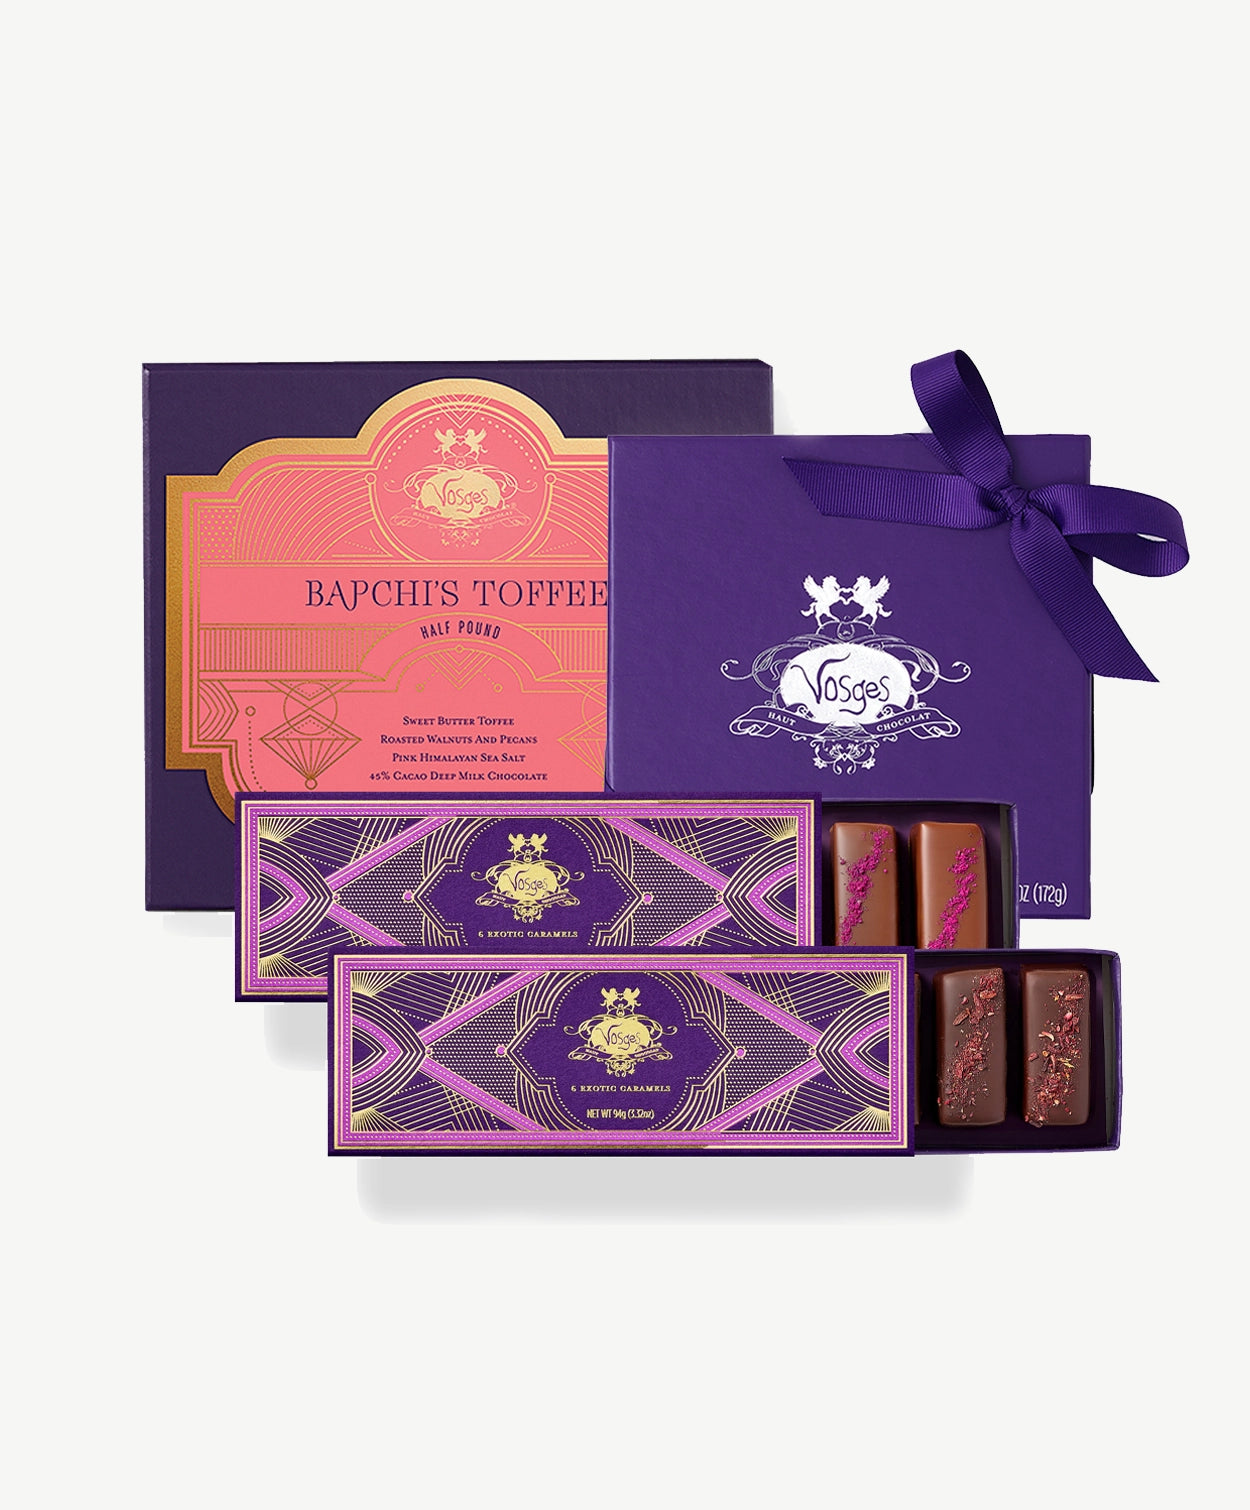 Vosges caramels, exotic truffle collection and Bapchi's toffee, included in the Grande Gift Tower sit on a white background.